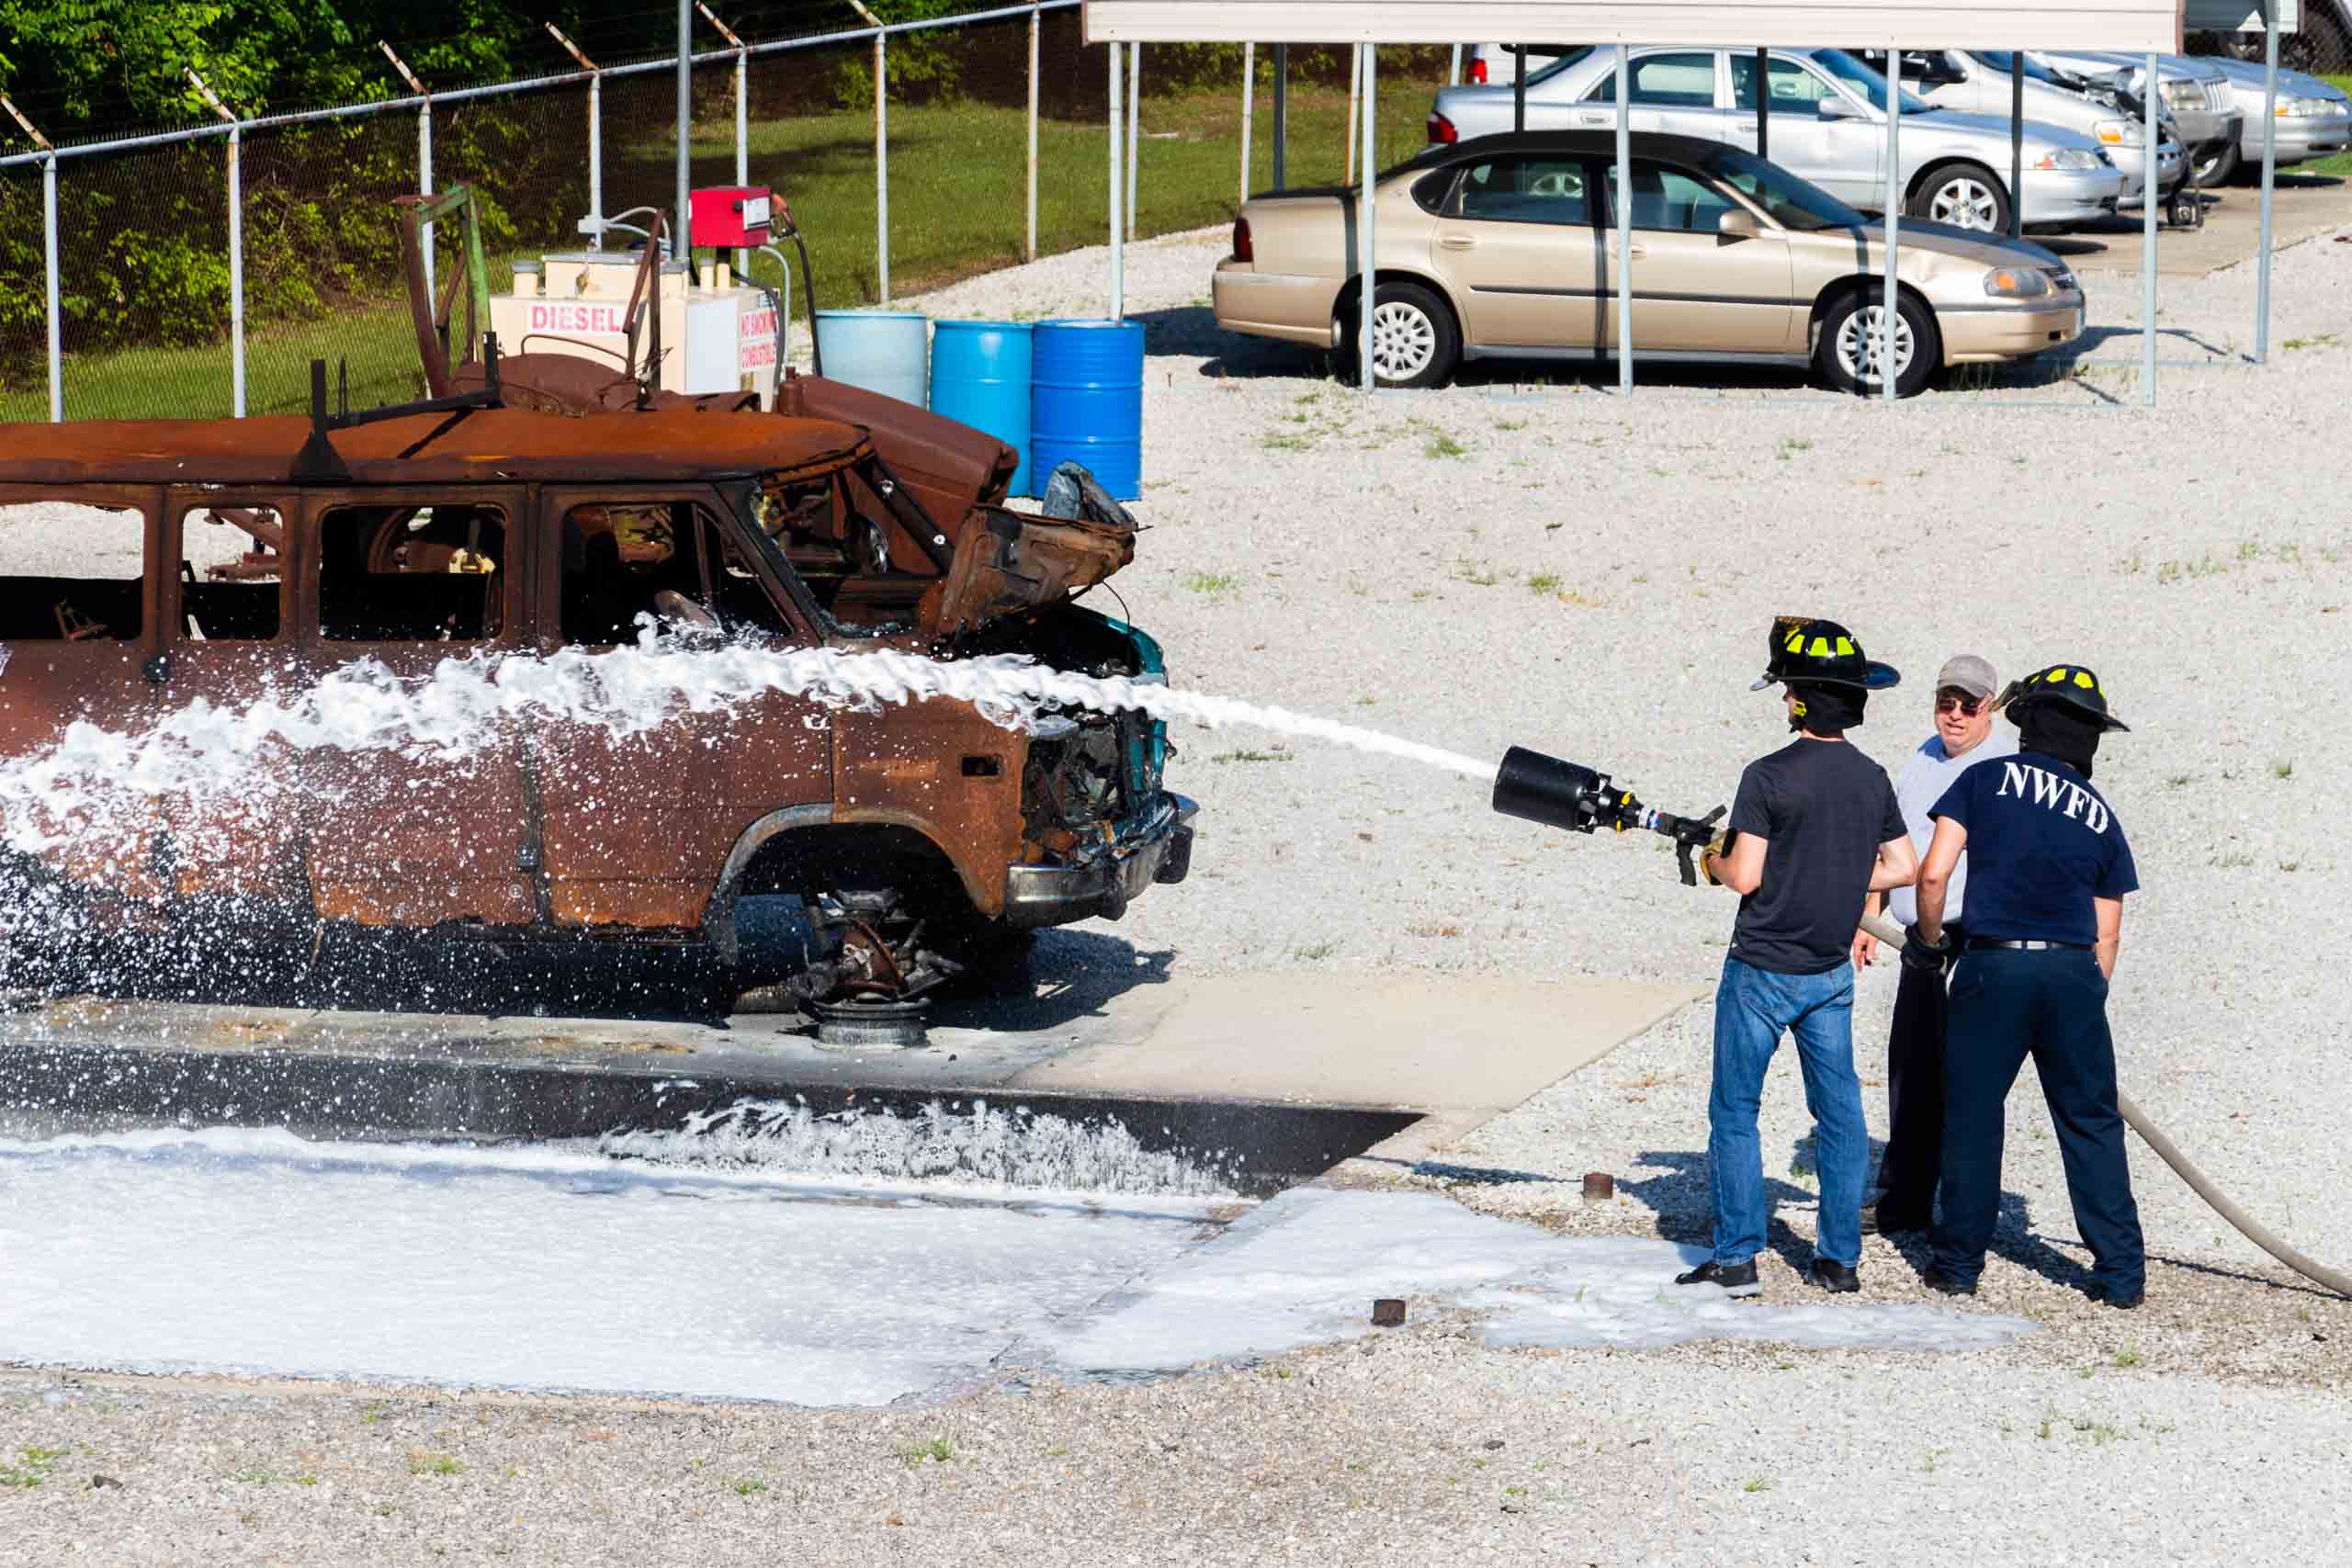 Fire Science Hazardous Materials training people learning to use the hose